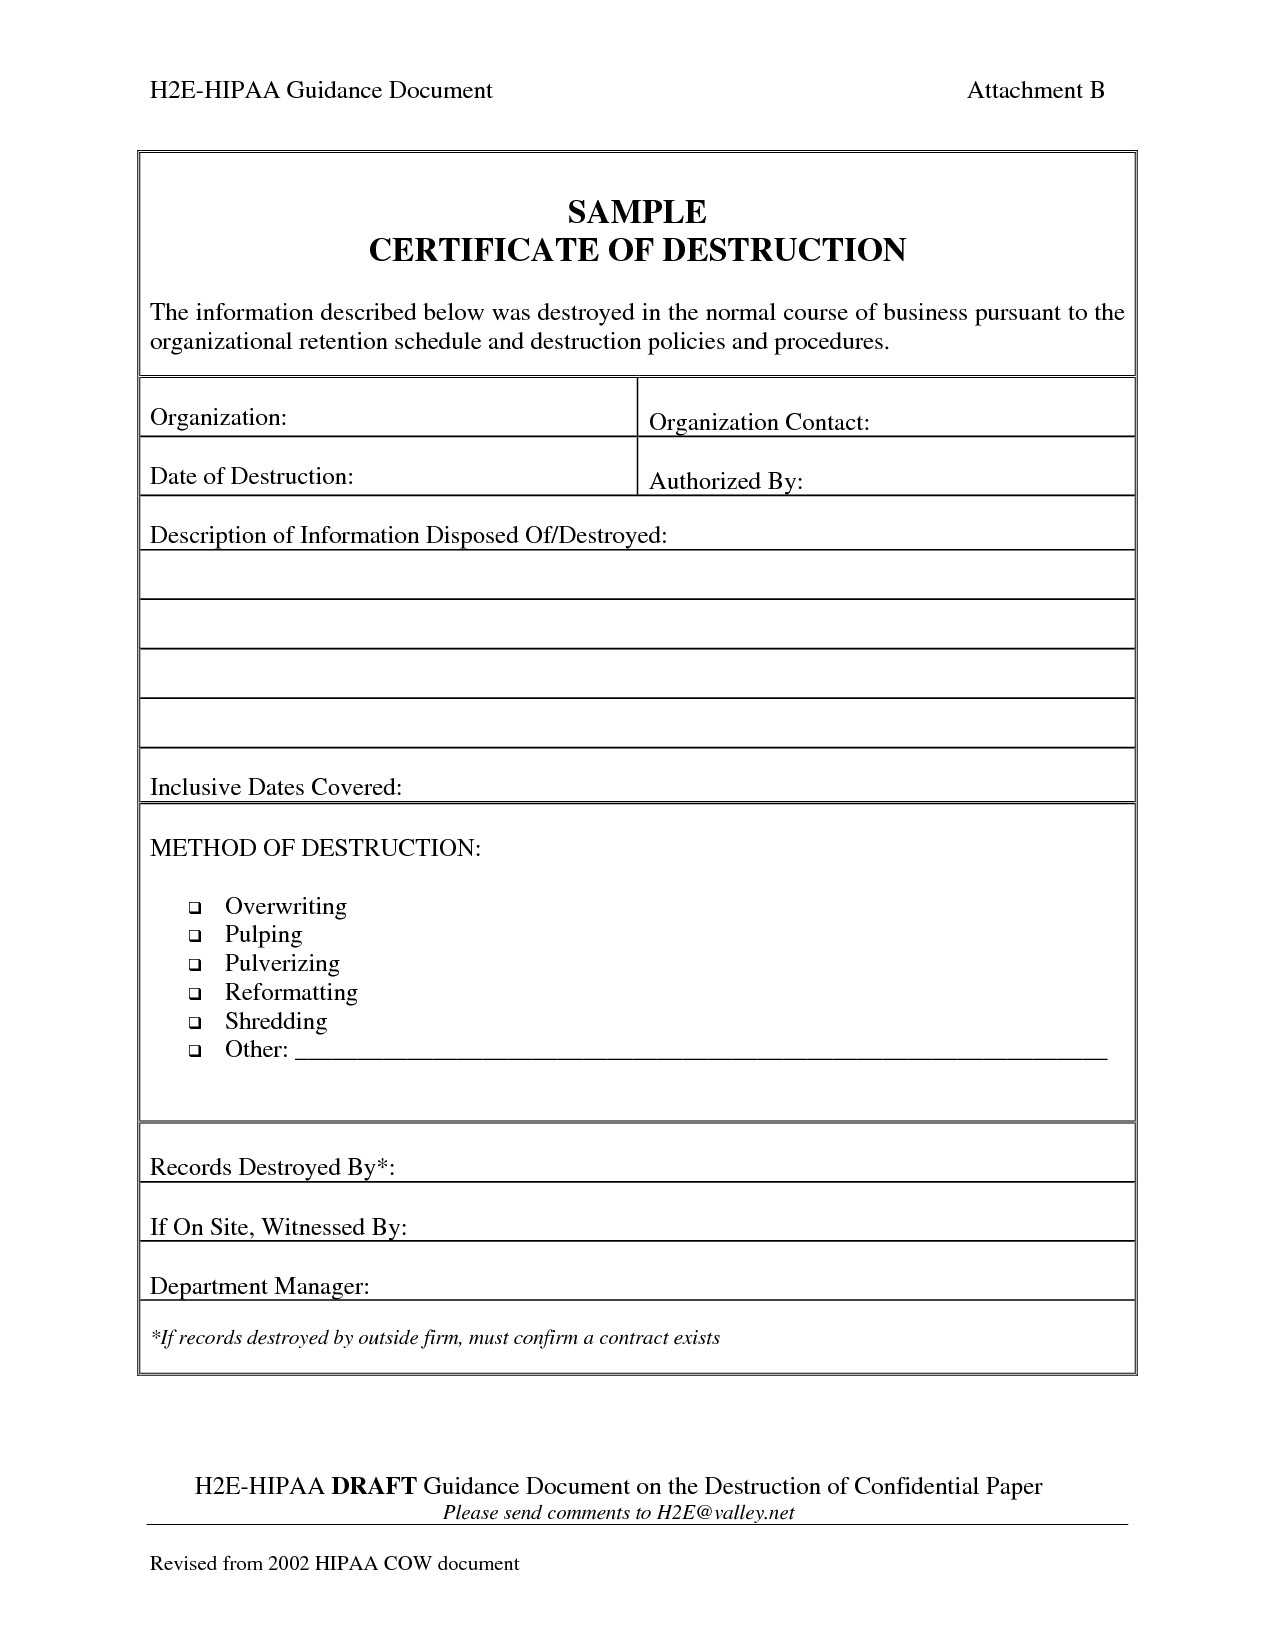 001 Template Ideas Certificate Of Destruction Frightening Data pertaining to Certificate Of Disposal Template